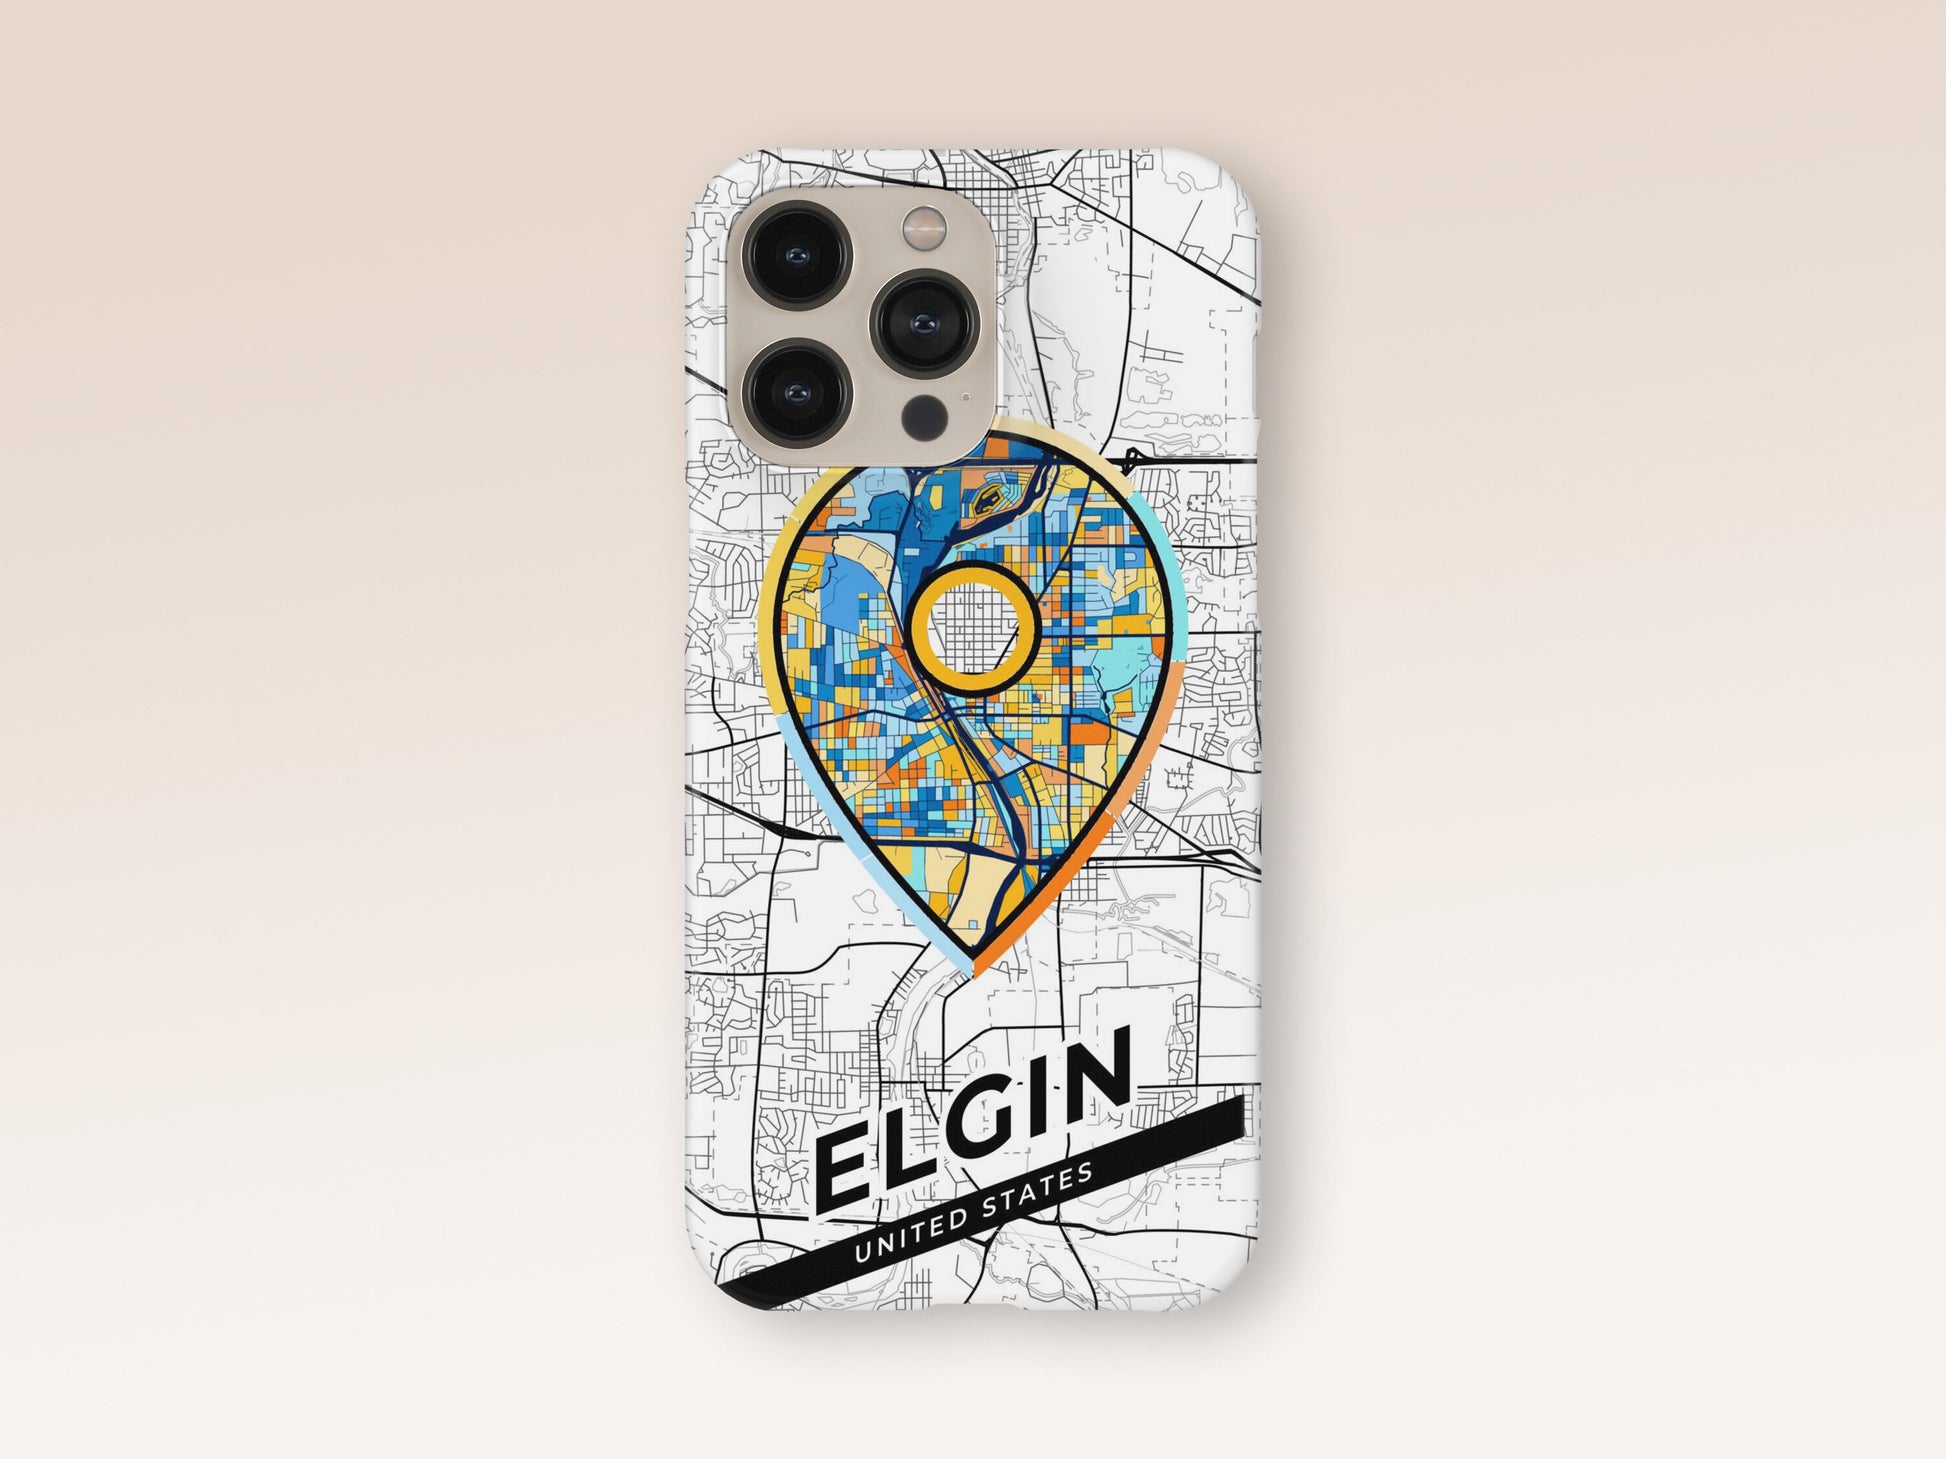 Elgin Illinois slim phone case with colorful icon. Birthday, wedding or housewarming gift. Couple match cases. 1